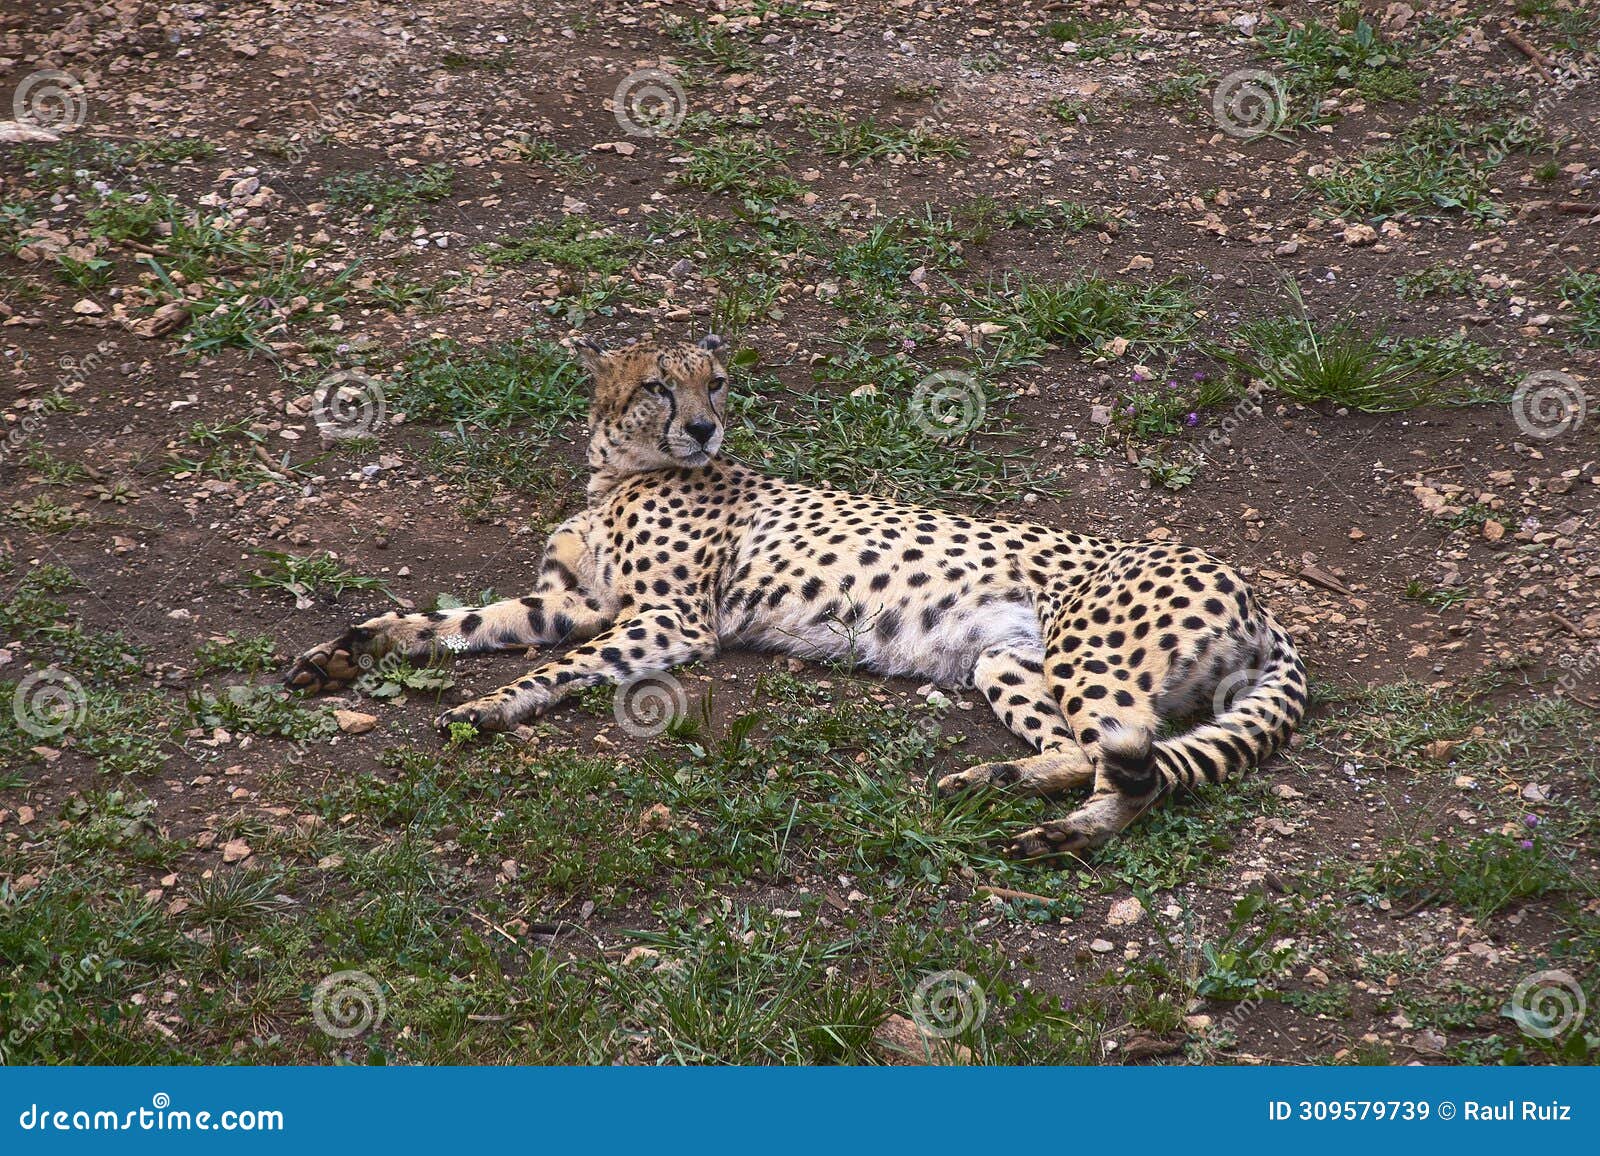 a geopard, lying on the grass of the savannah